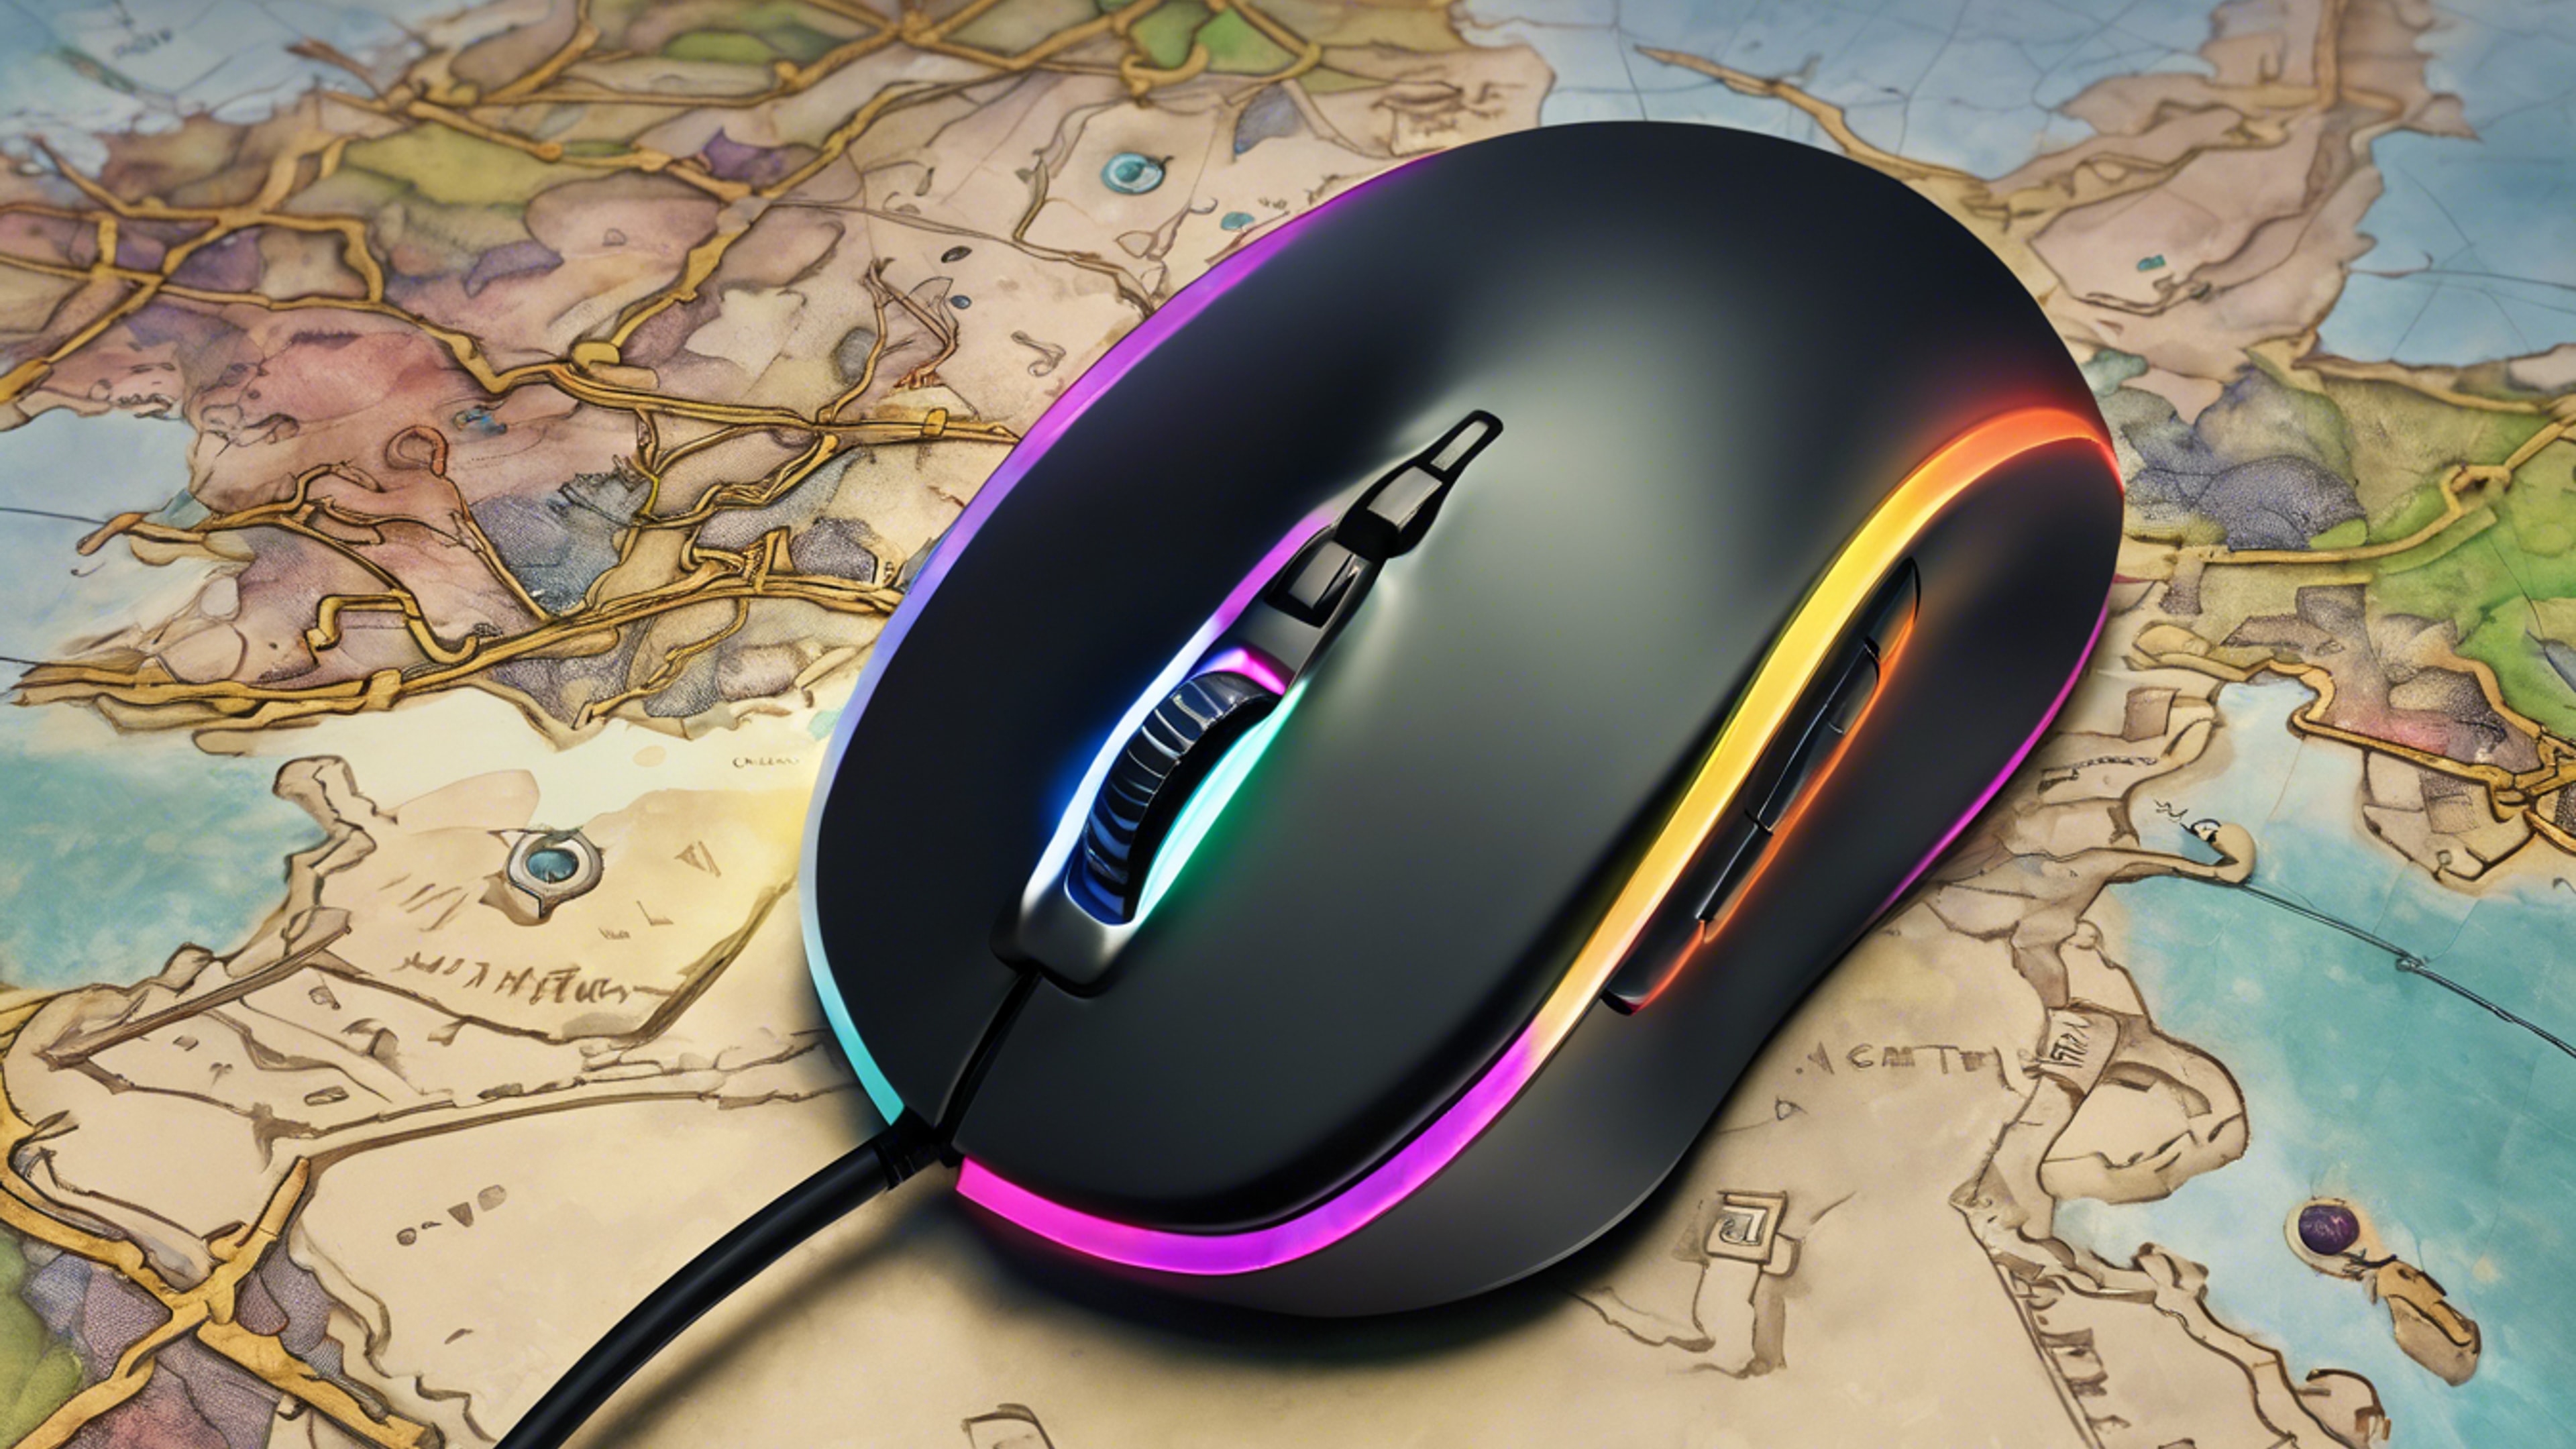 A close up of black gaming mouse with multicoloured lights, placed on a mouse pad with a map of a fantasy world. Шпалери[91f93c56765f47f0bd9c]